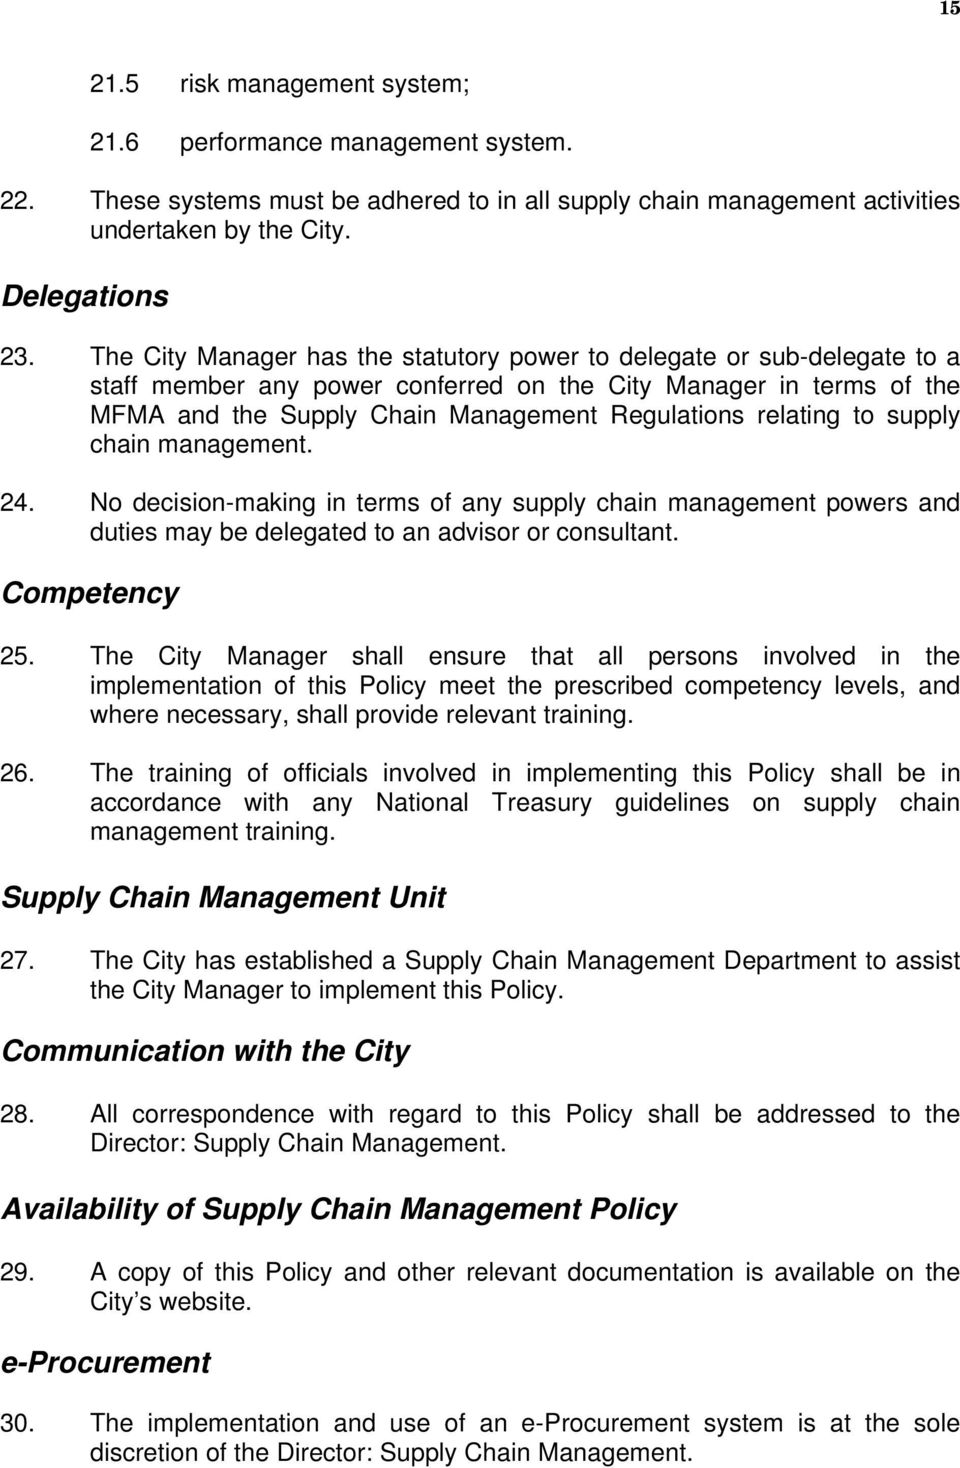 relating to supply chain management. 24. No decision-making in terms of any supply chain management powers and duties may be delegated to an advisor or consultant. Competency 25.